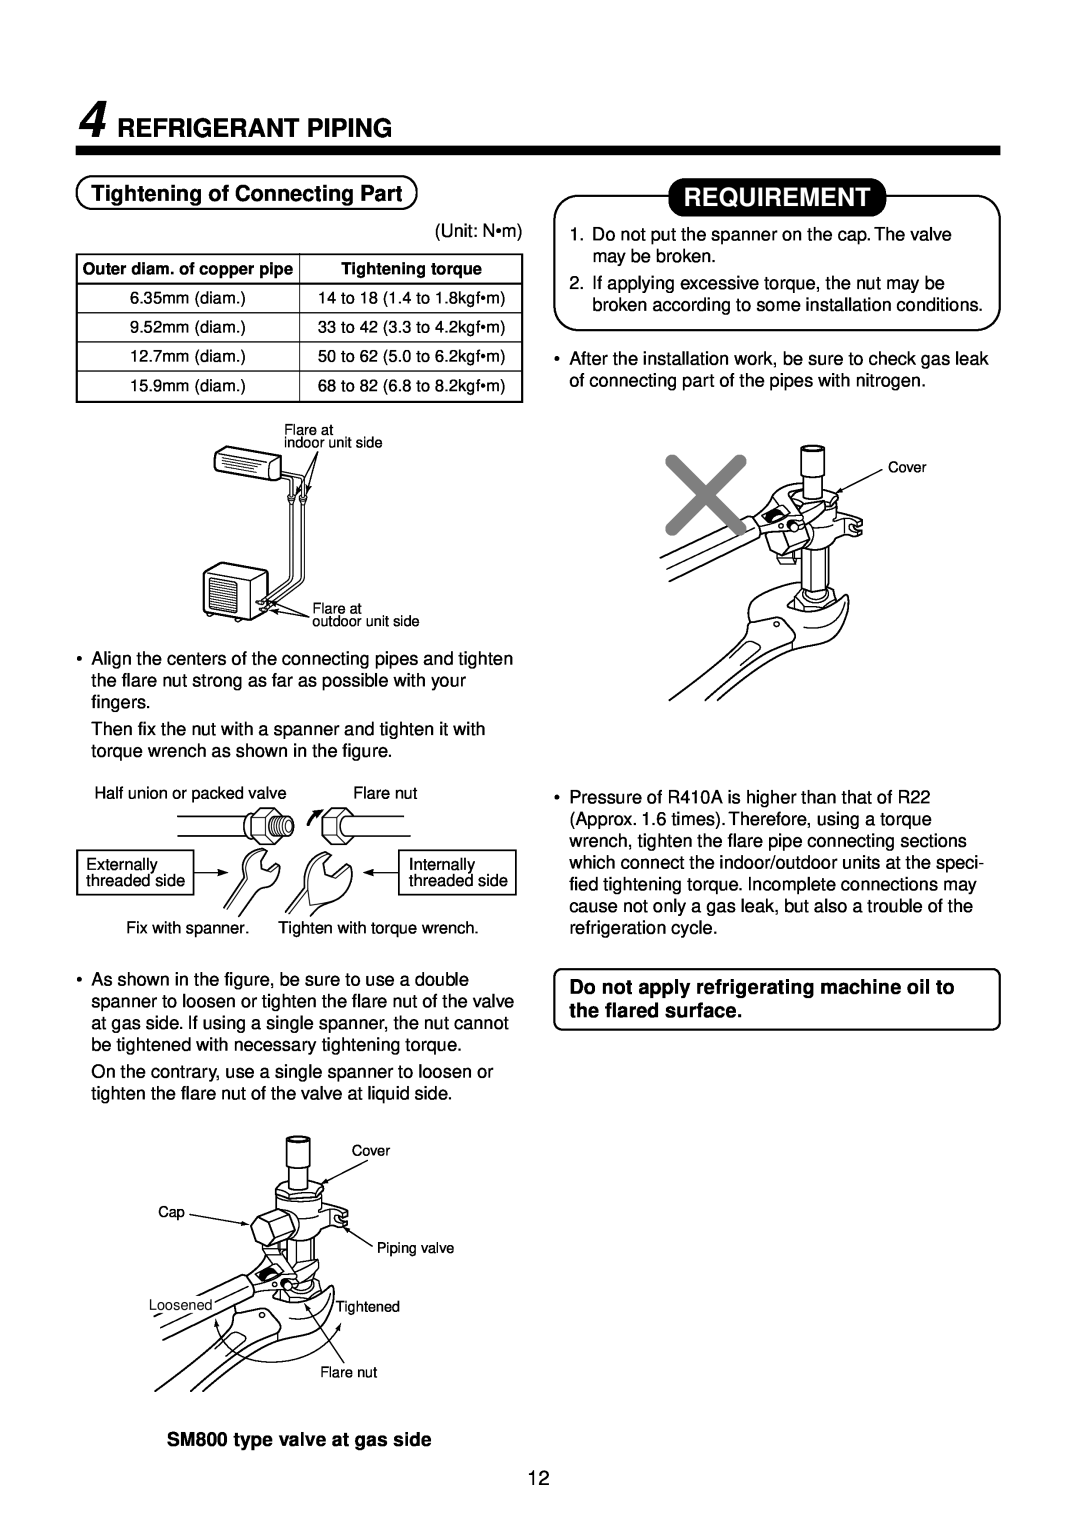 Toshiba R410A service manual Requirement, Refrigerant Piping, Tightening of Connecting Part, SM800 type valve at gas side 